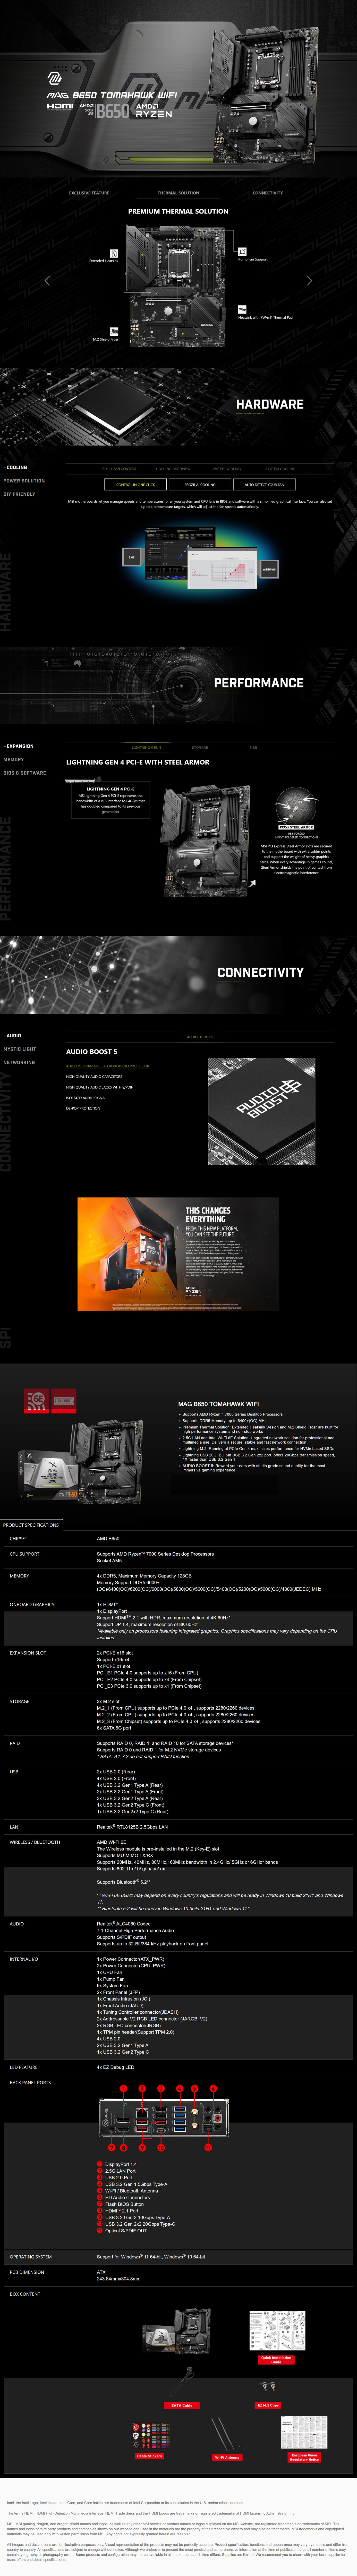 A large marketing image providing additional information about the product MSI MAG B650 Tomahawk WiFi AM5 ATX Desktop Motherboard - Additional alt info not provided